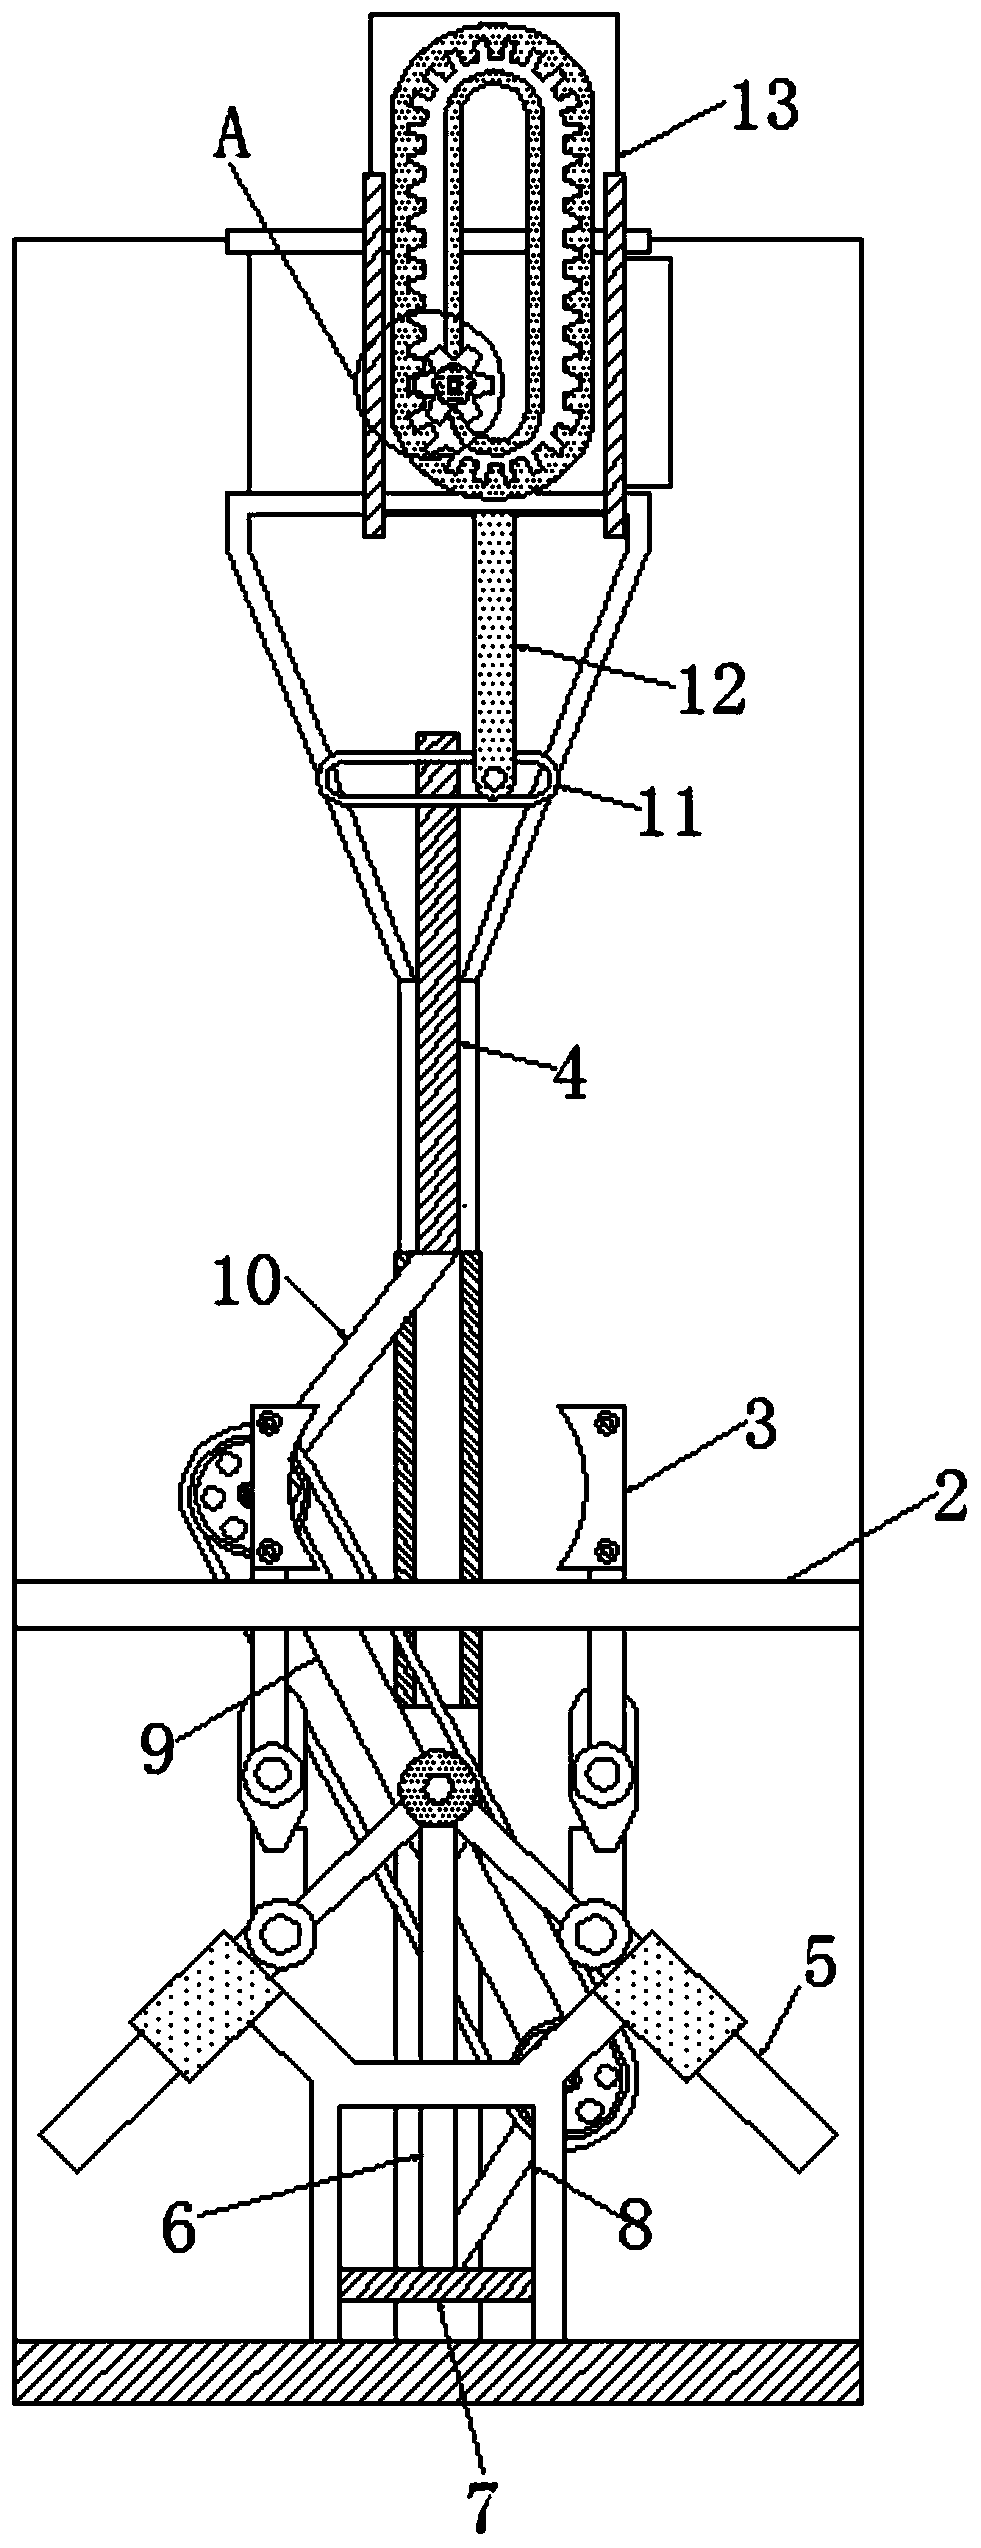 Clamped piston perforating device capable of guaranteeing drilling stability based on reciprocating movement